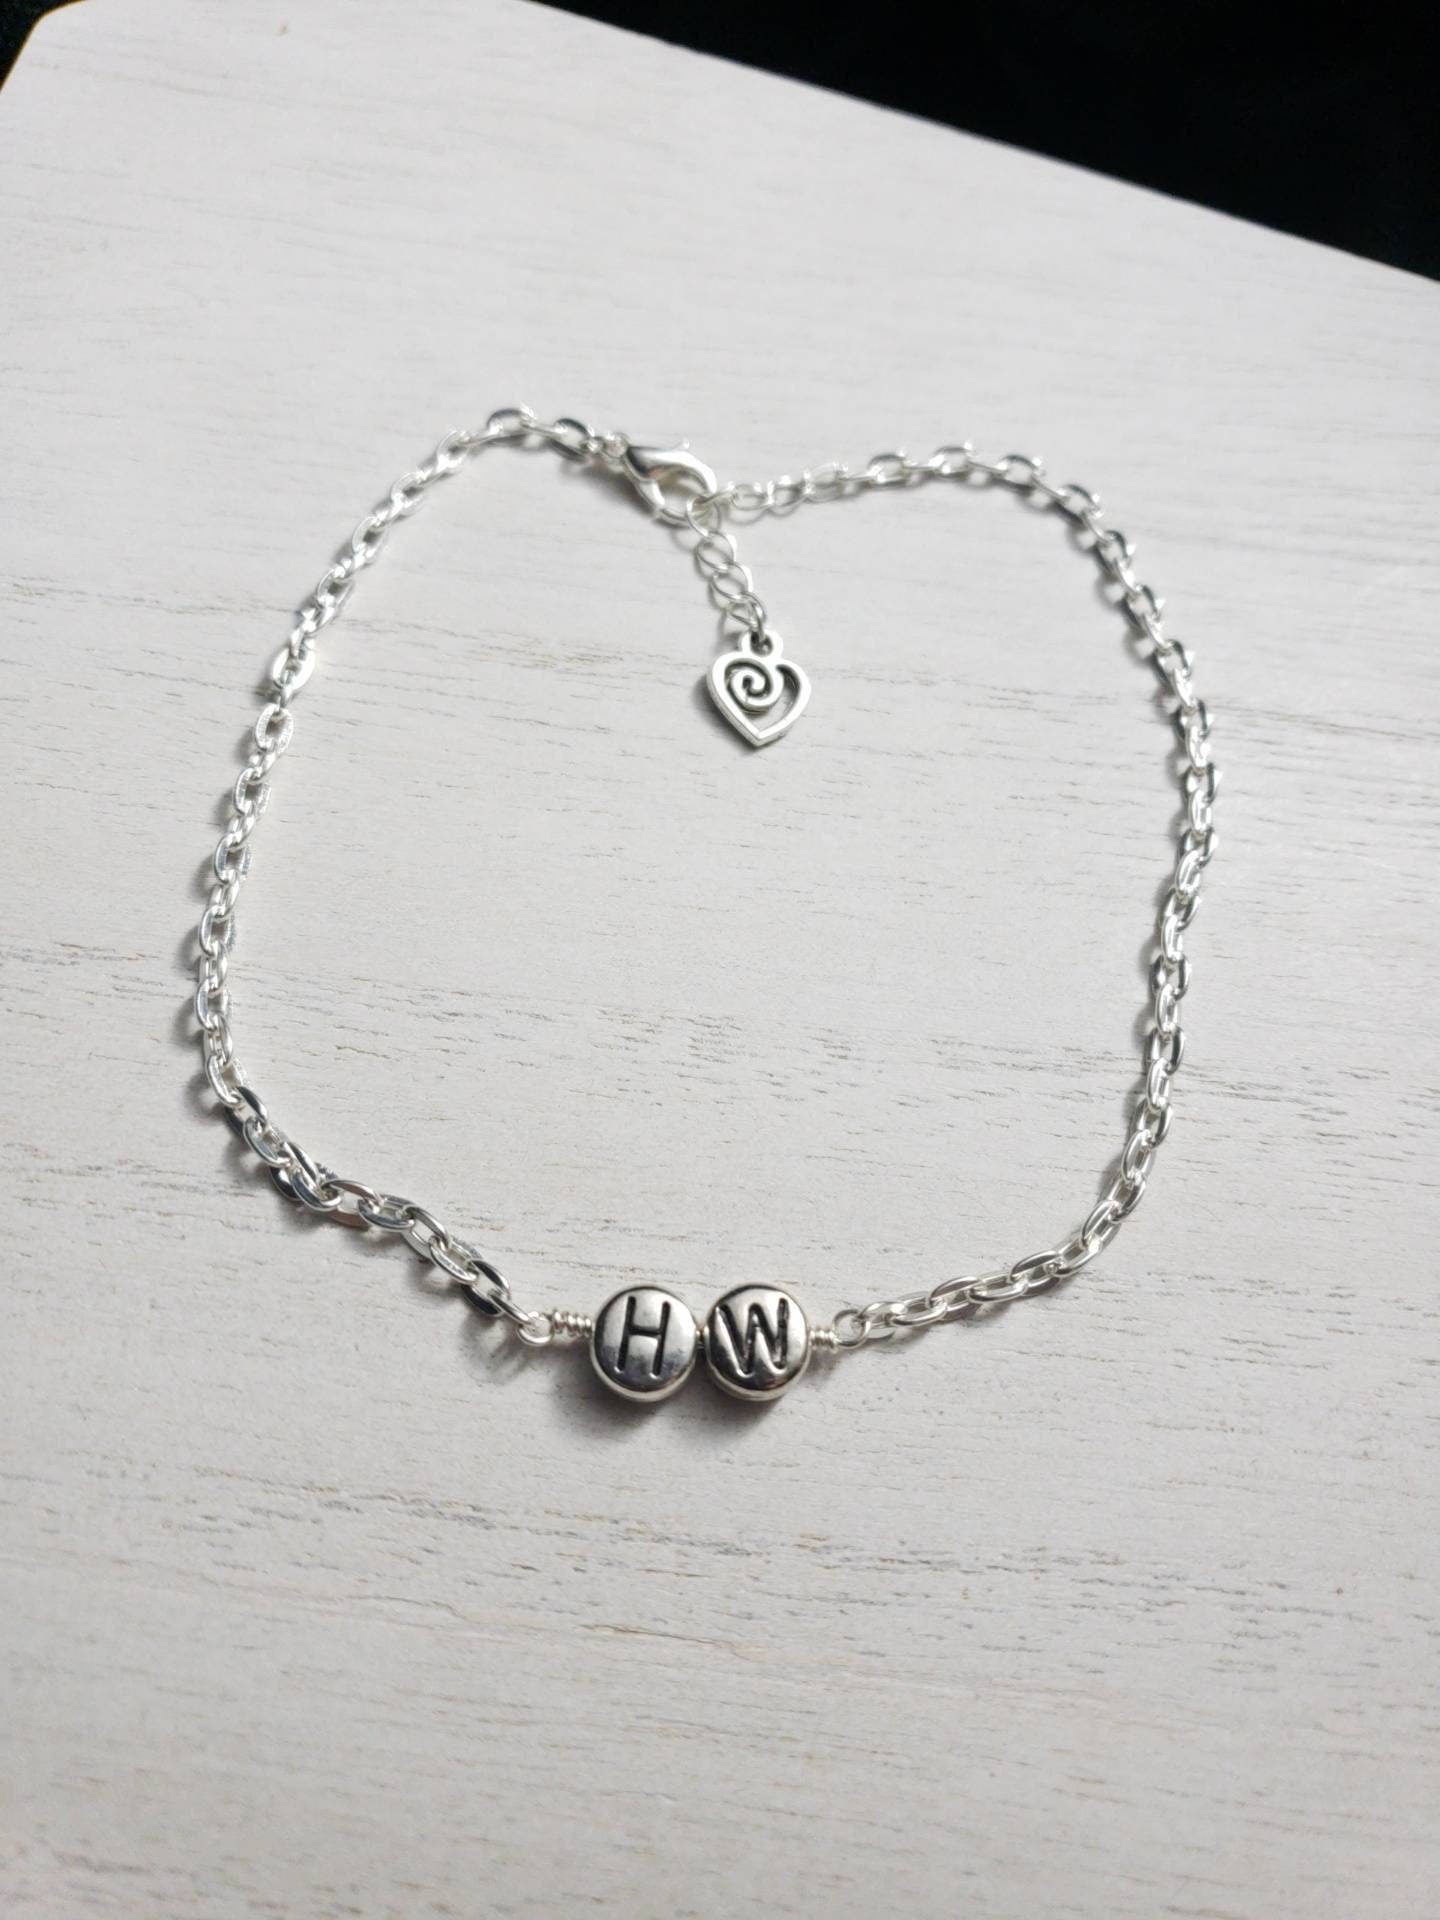 Sterling Silver Chain Hotwife Anklet, Personalized Anklet, Kinky, Fetish Body Jewelry